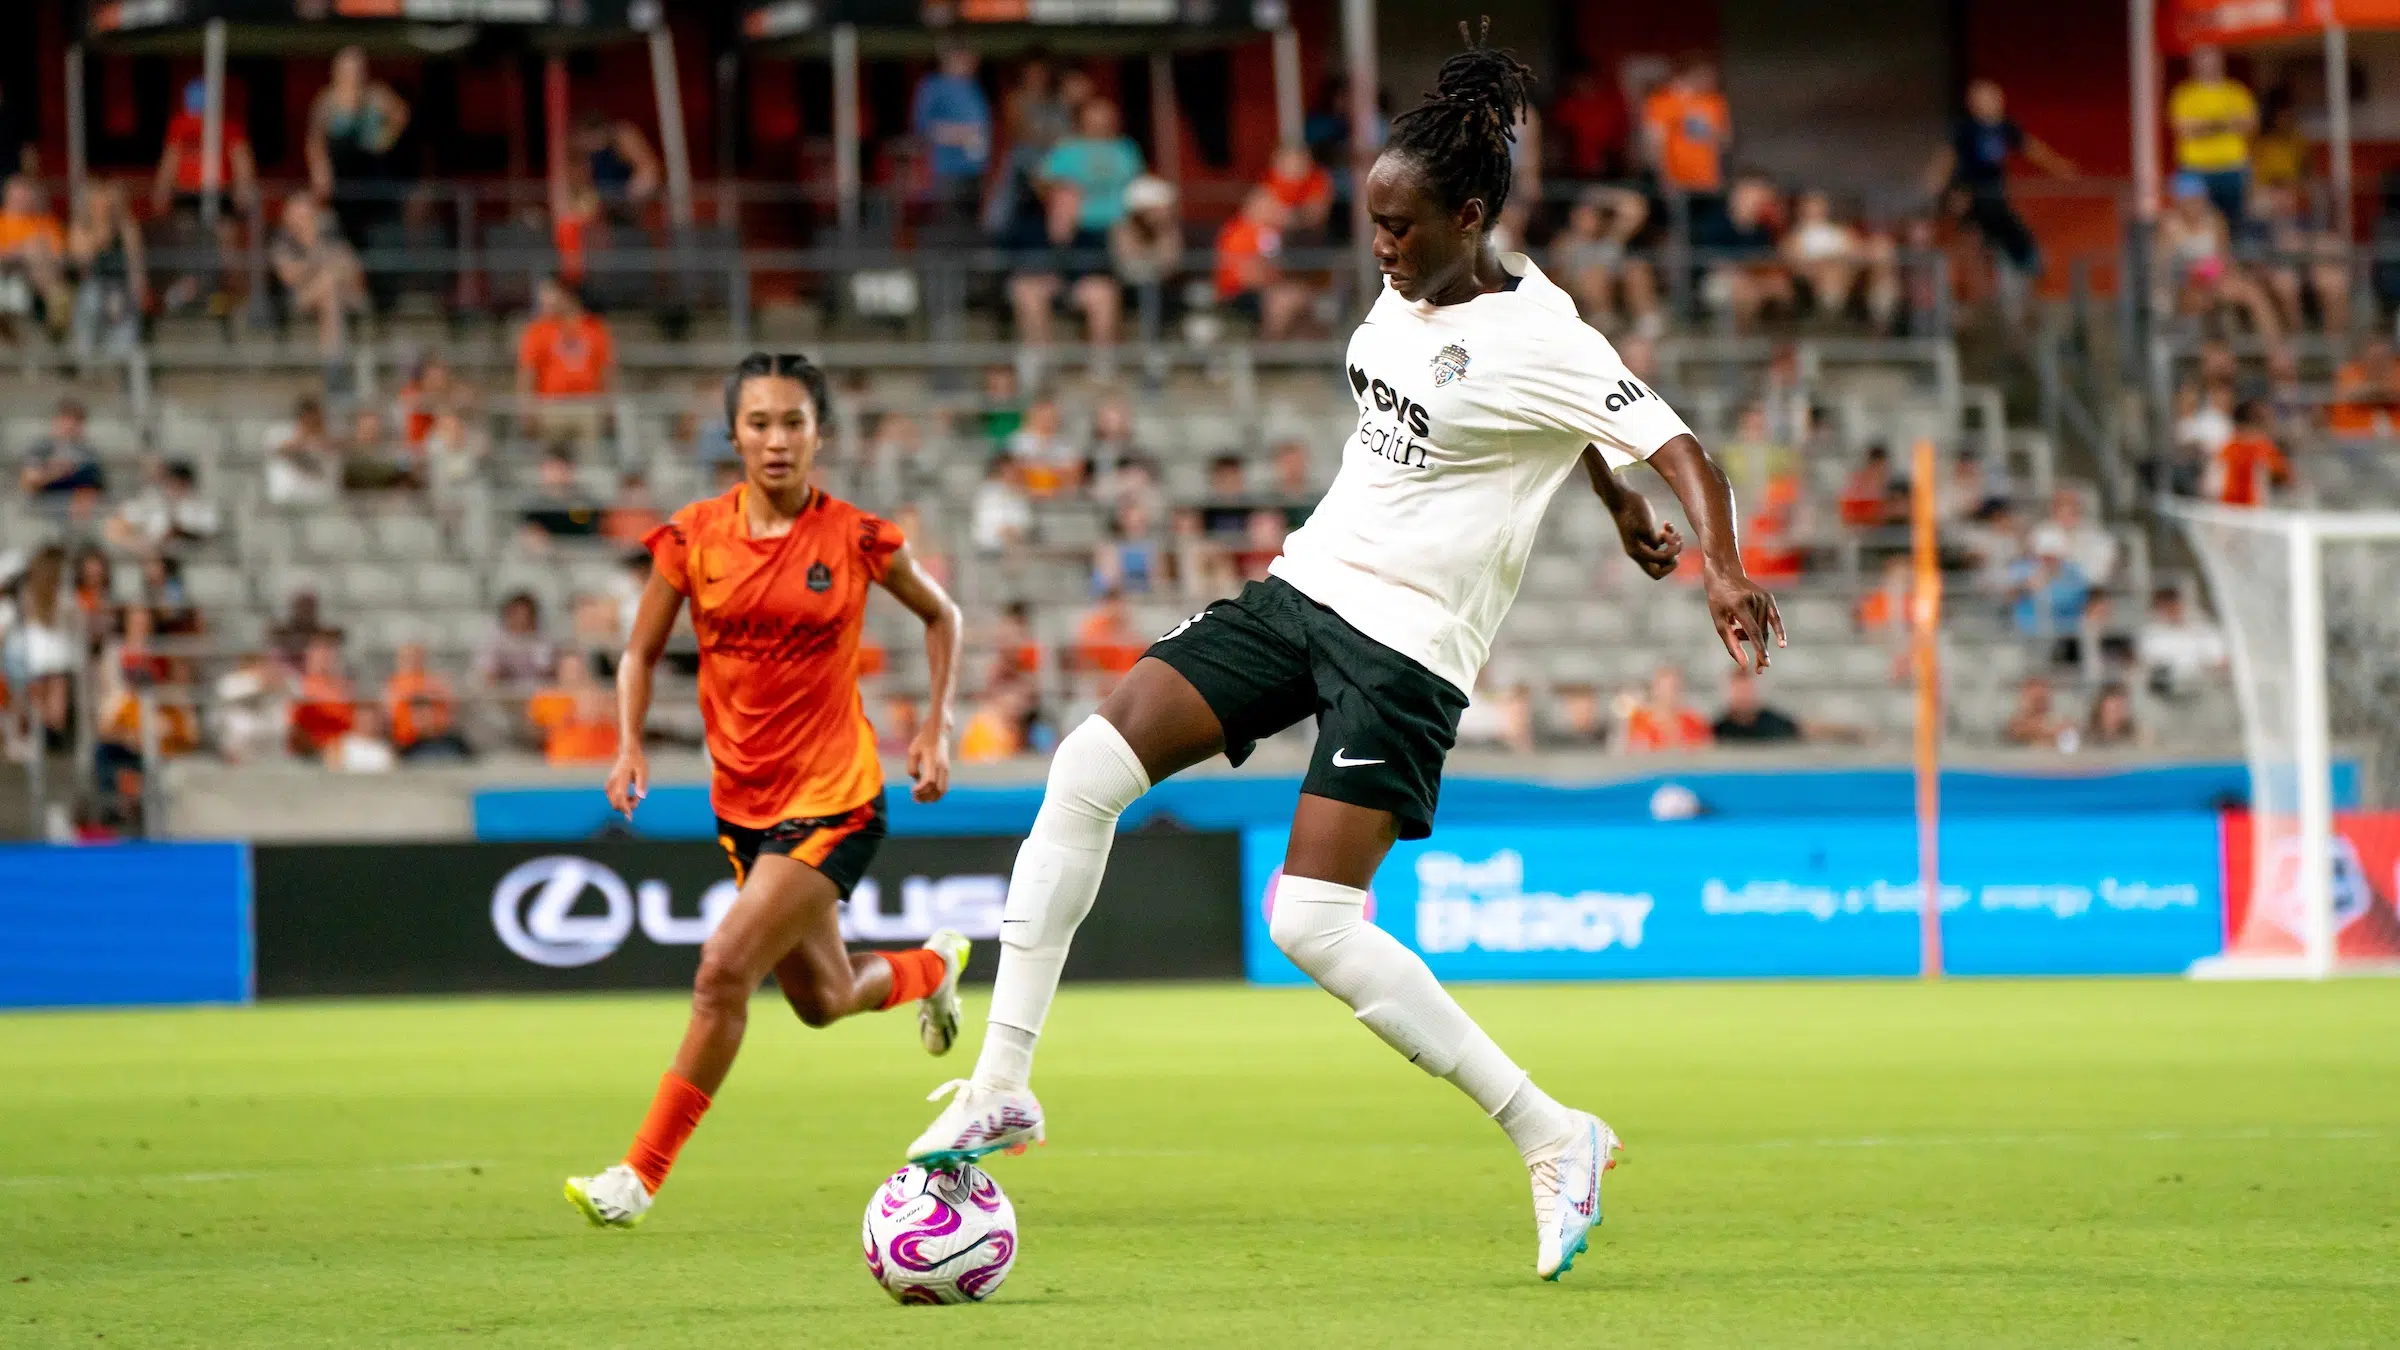 Ouleymata Sarr in a white shirt, black shorts, white socks and white cleats controls a soccer ball with her right foot as a defender in an orange uniform tries to challenge her.